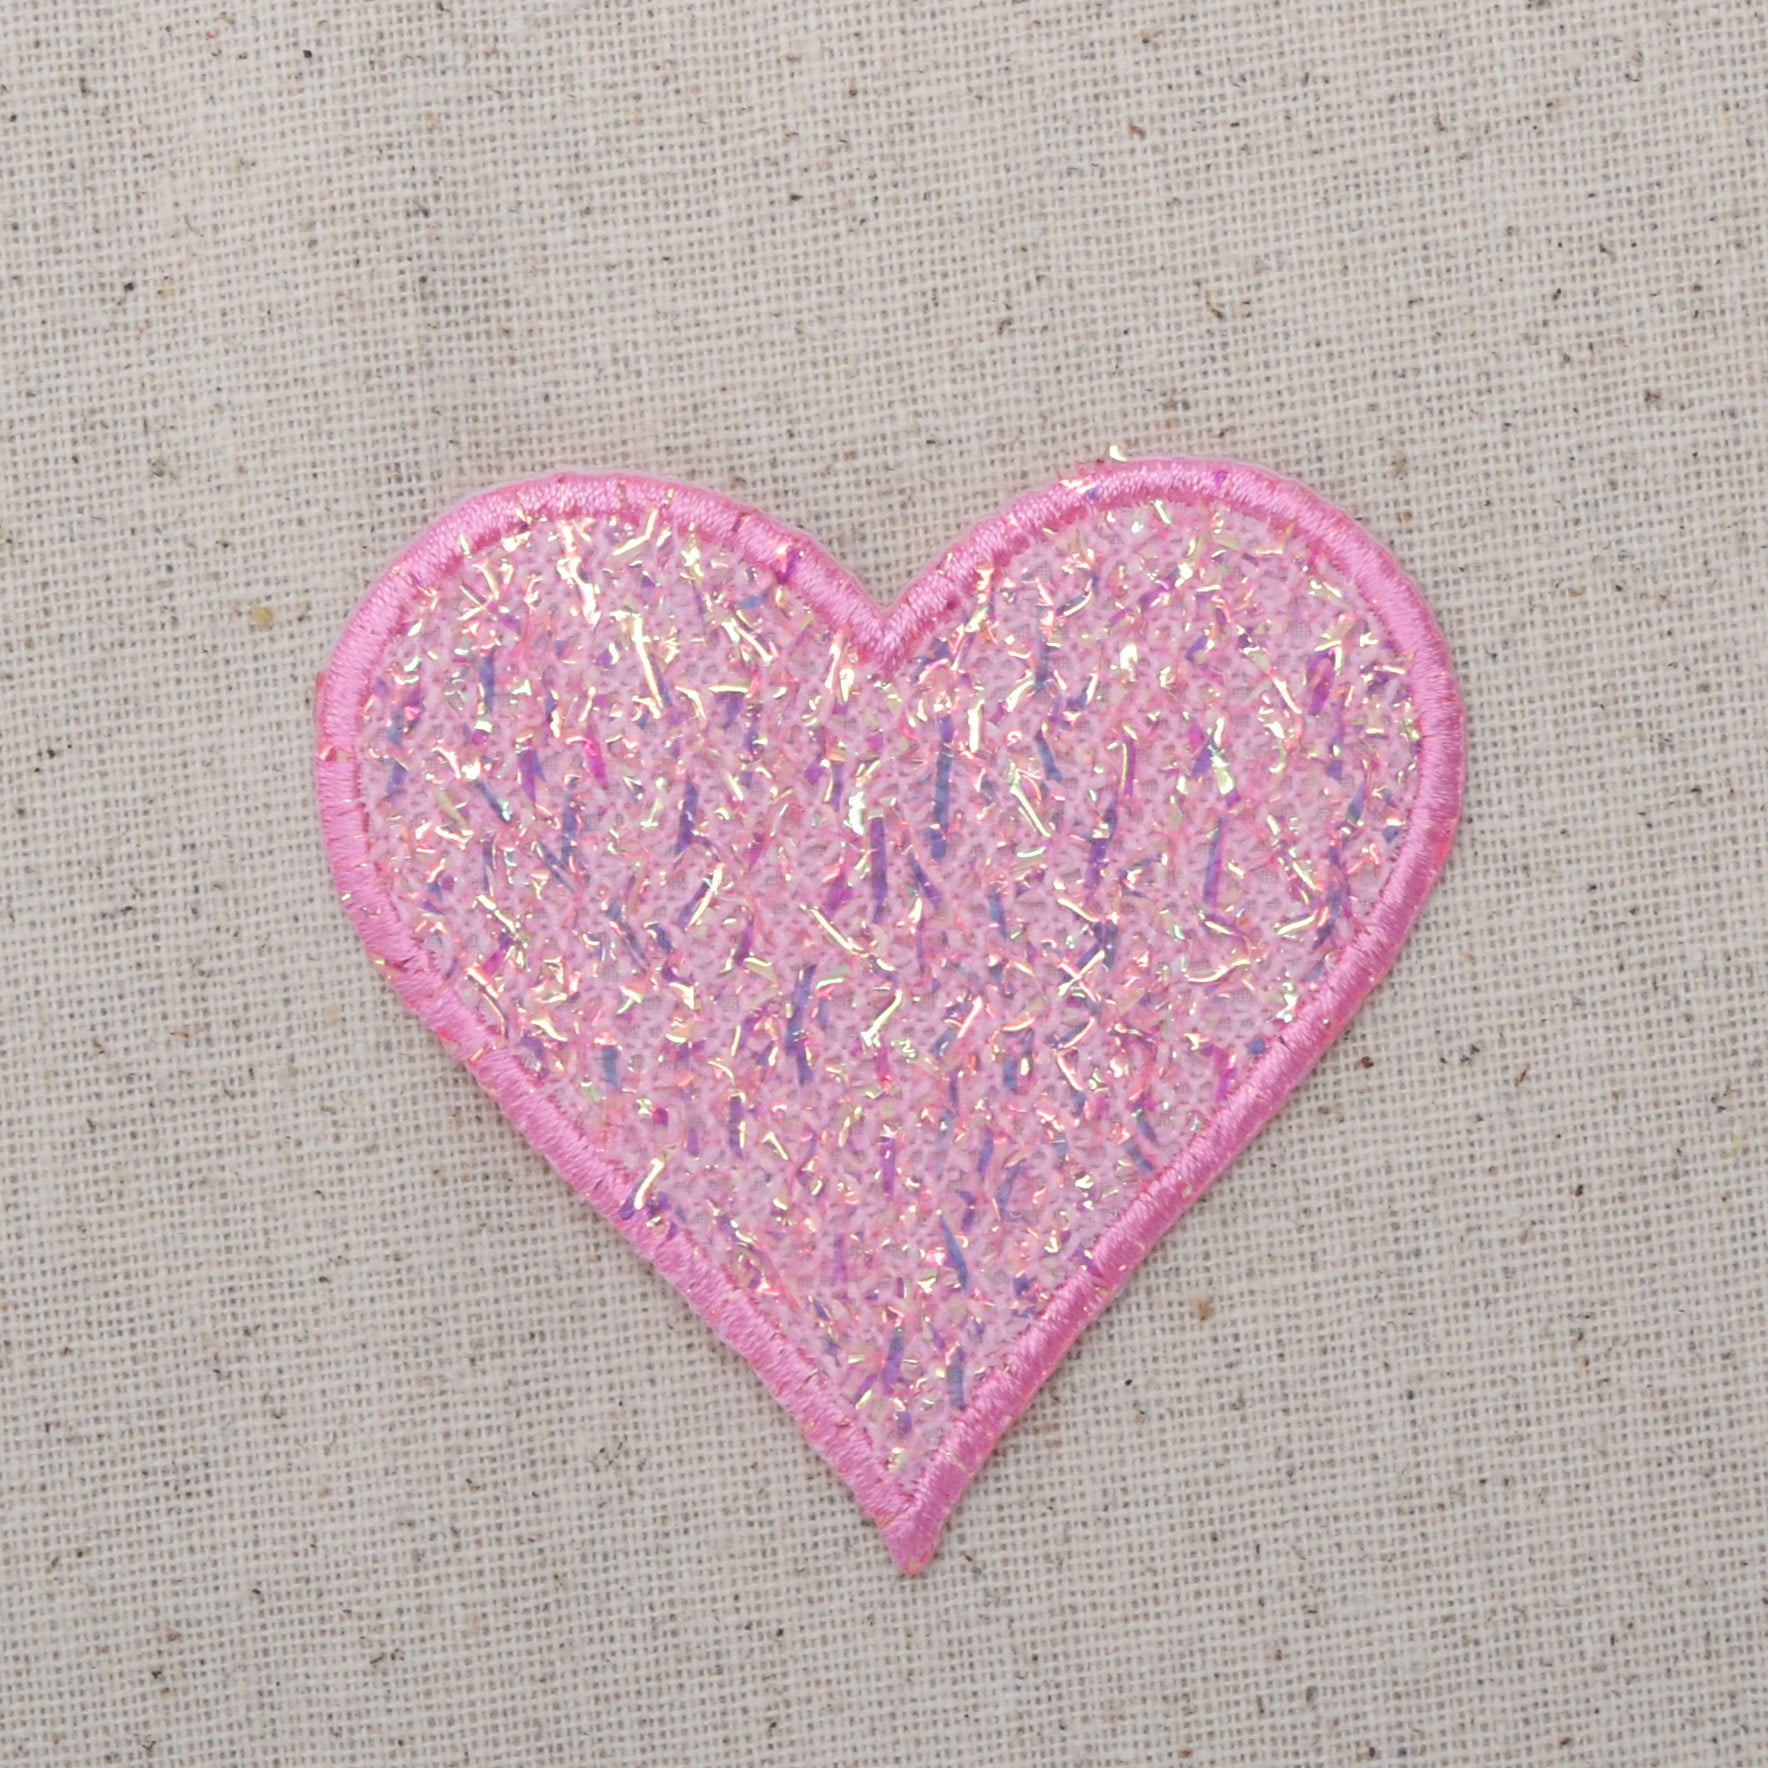 Buy ZOTOONE Iron On Heart Patches For Clothes Embroidery Applique